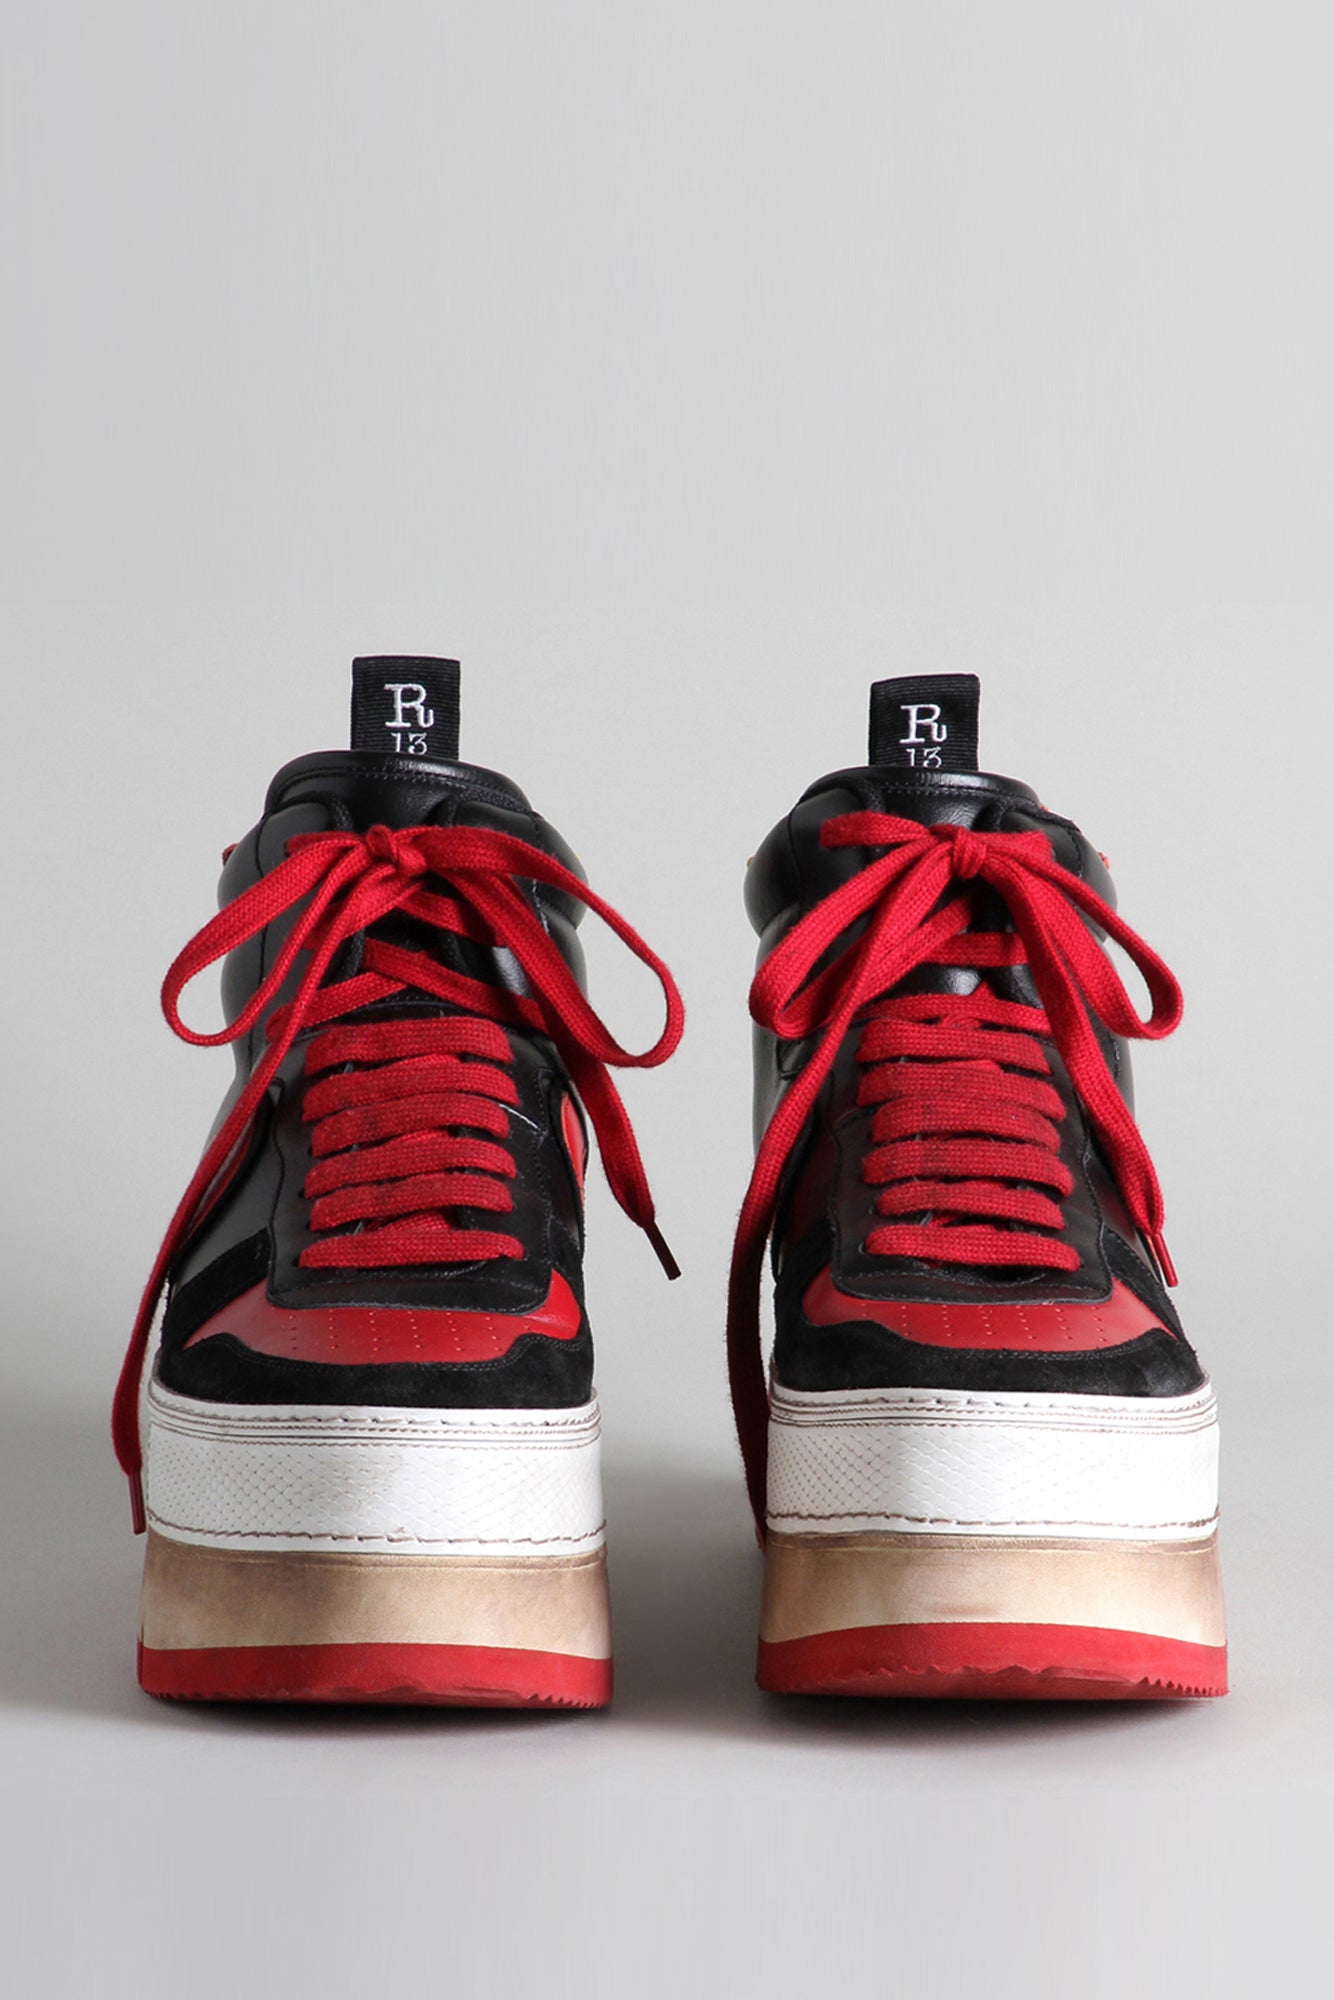 RIOT LEATHER HIGH TOP - RED AND BLACK